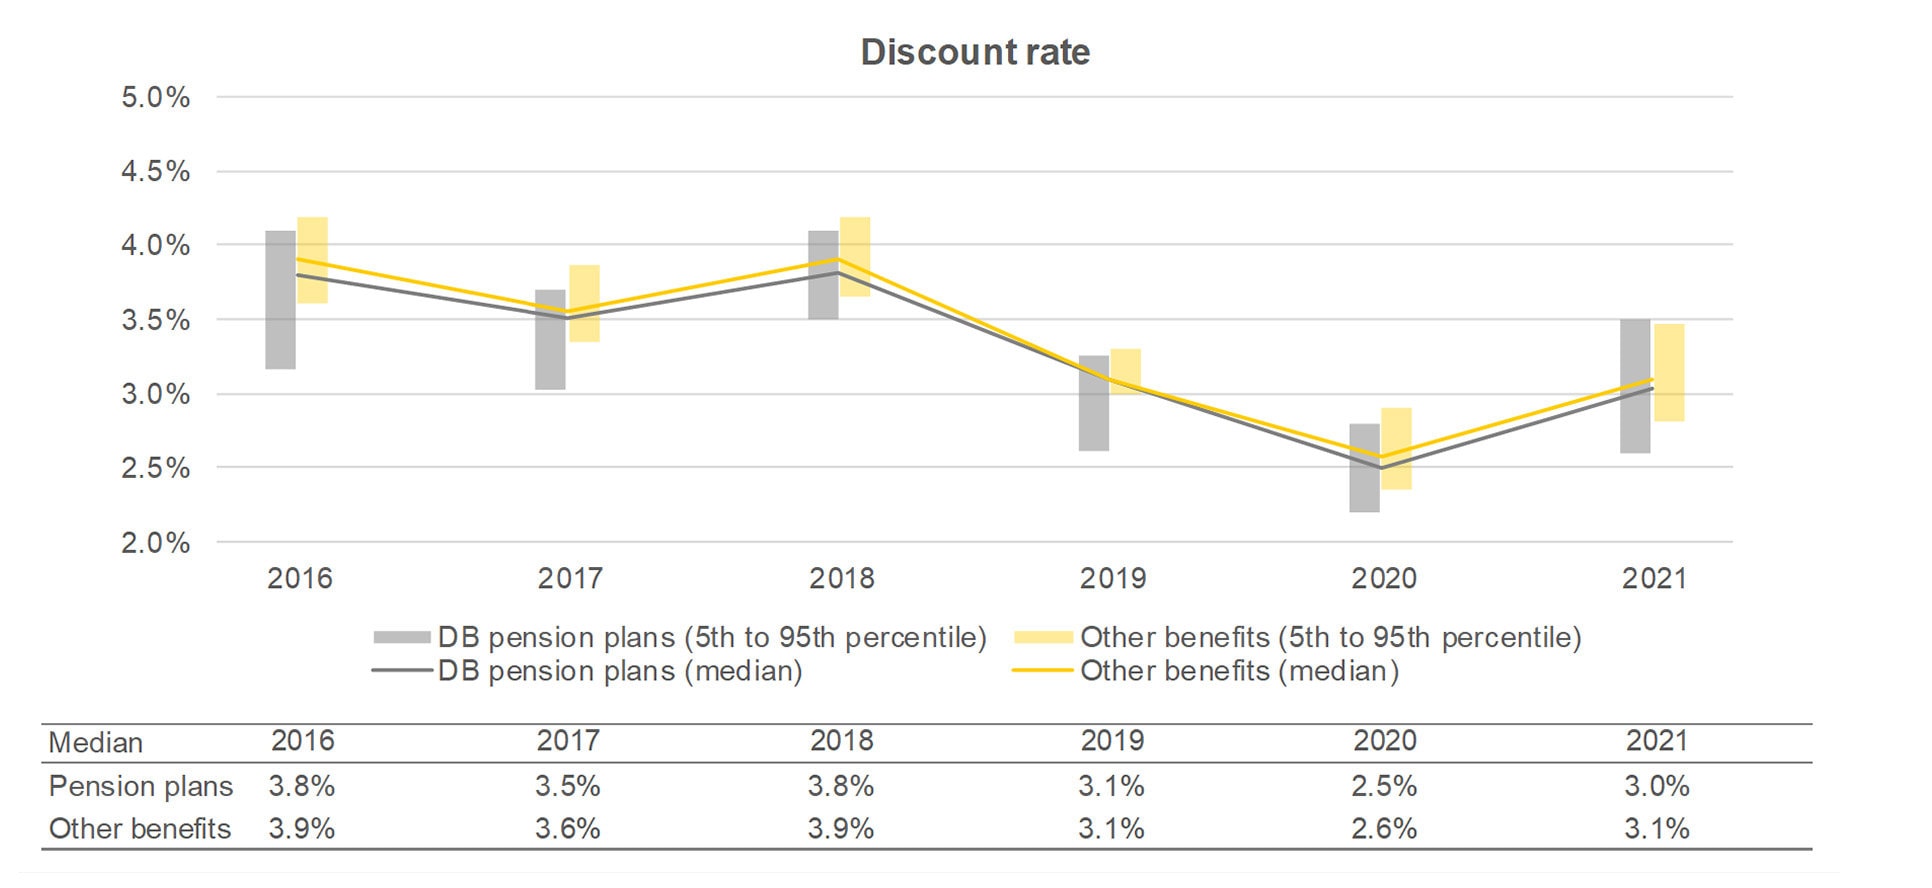 Where Do You Use Discount Rate In Defined Benefit Plans